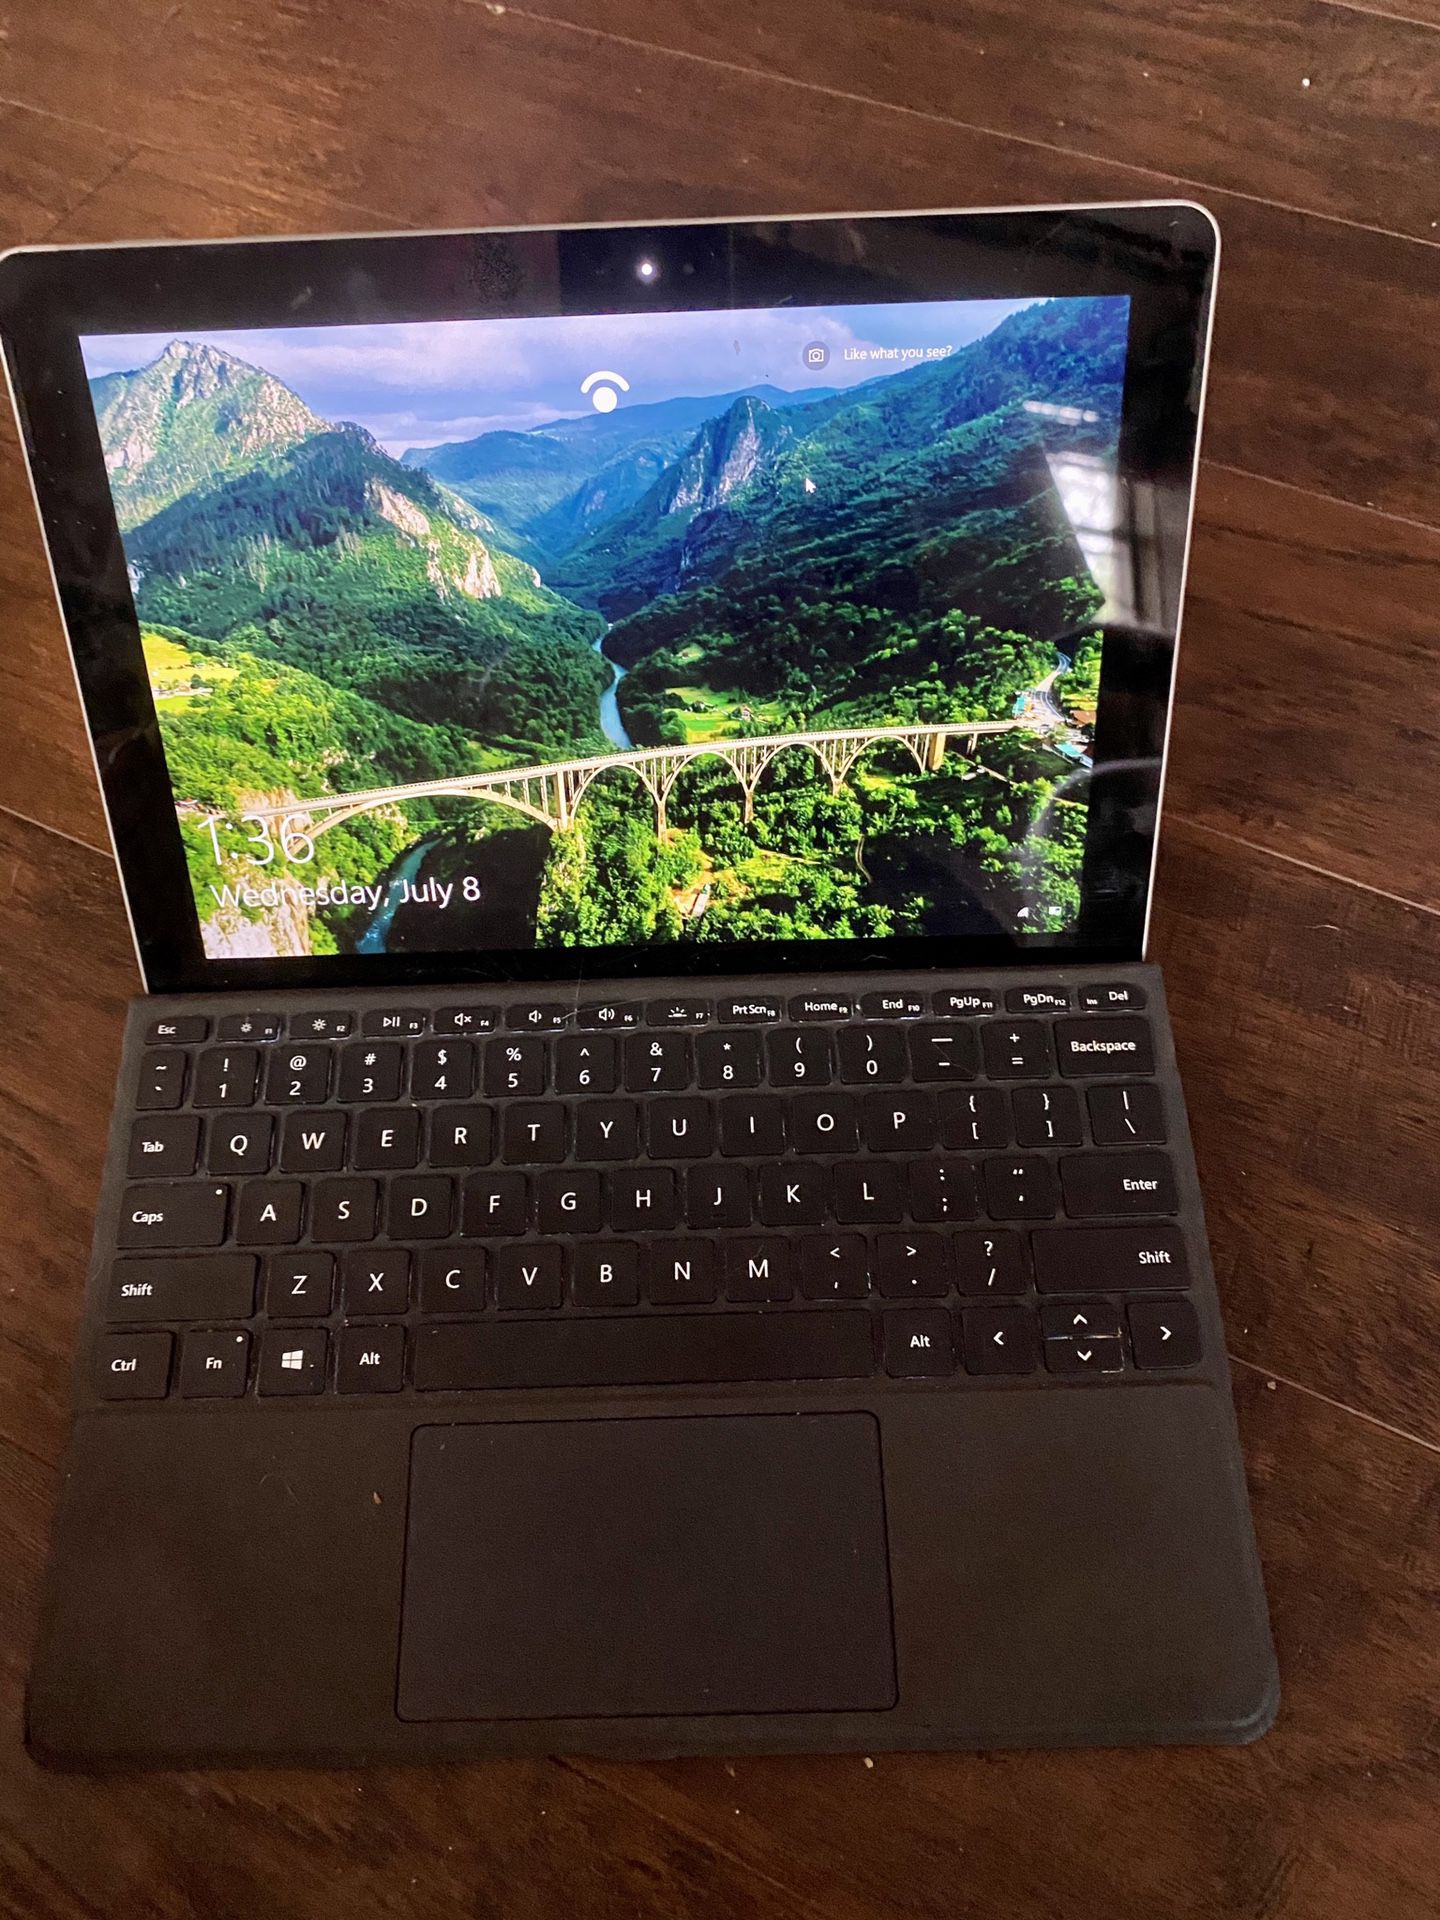 Microsoft Surface Go 2-in-1 tablet/laptop